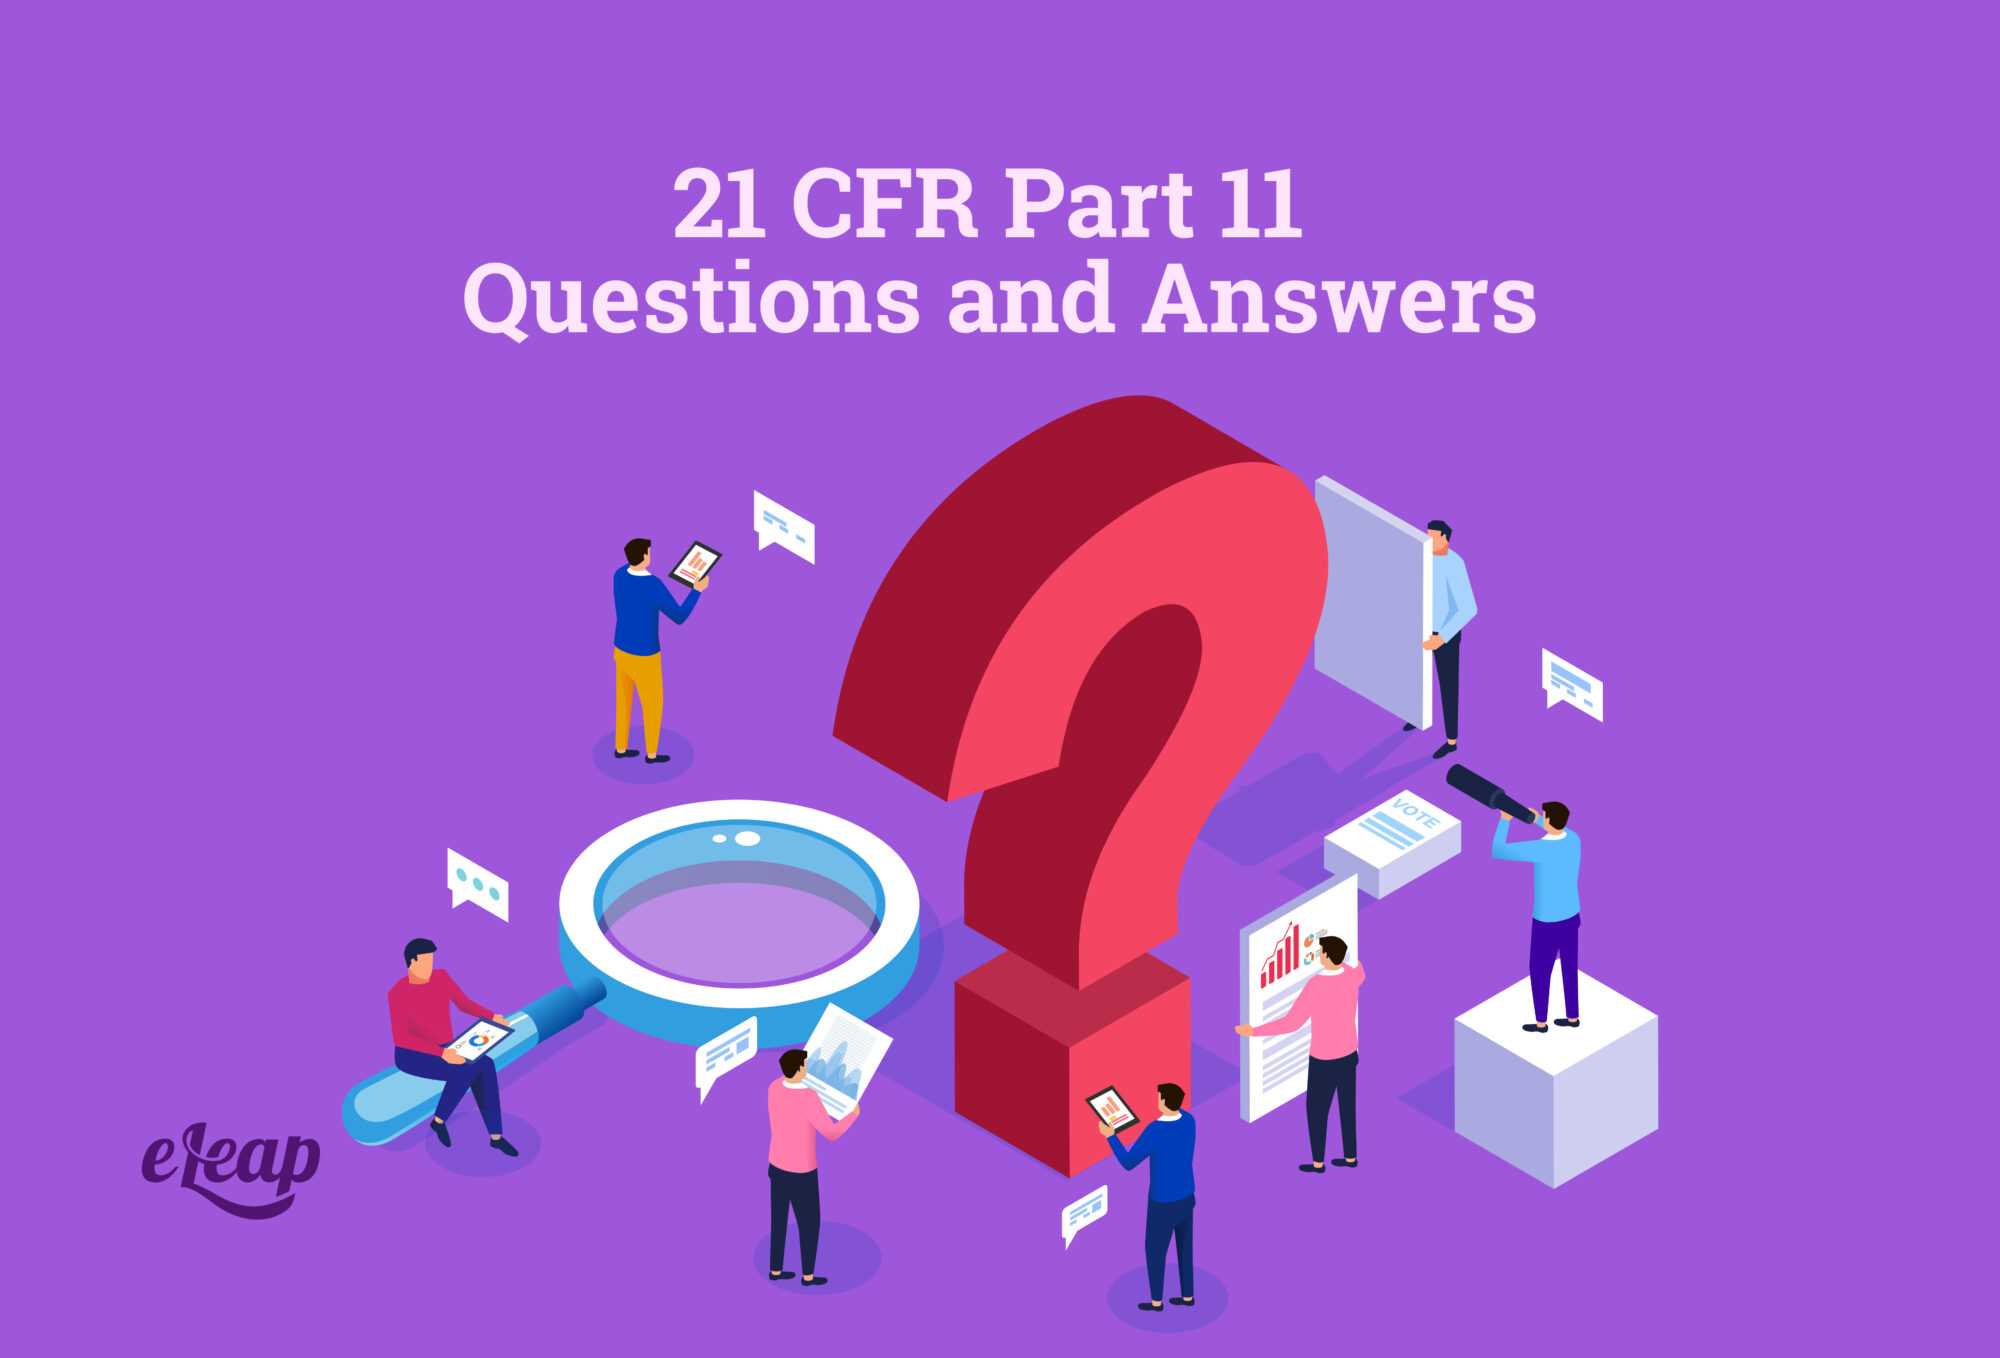 21 CFR Part 11 Questions and Answers